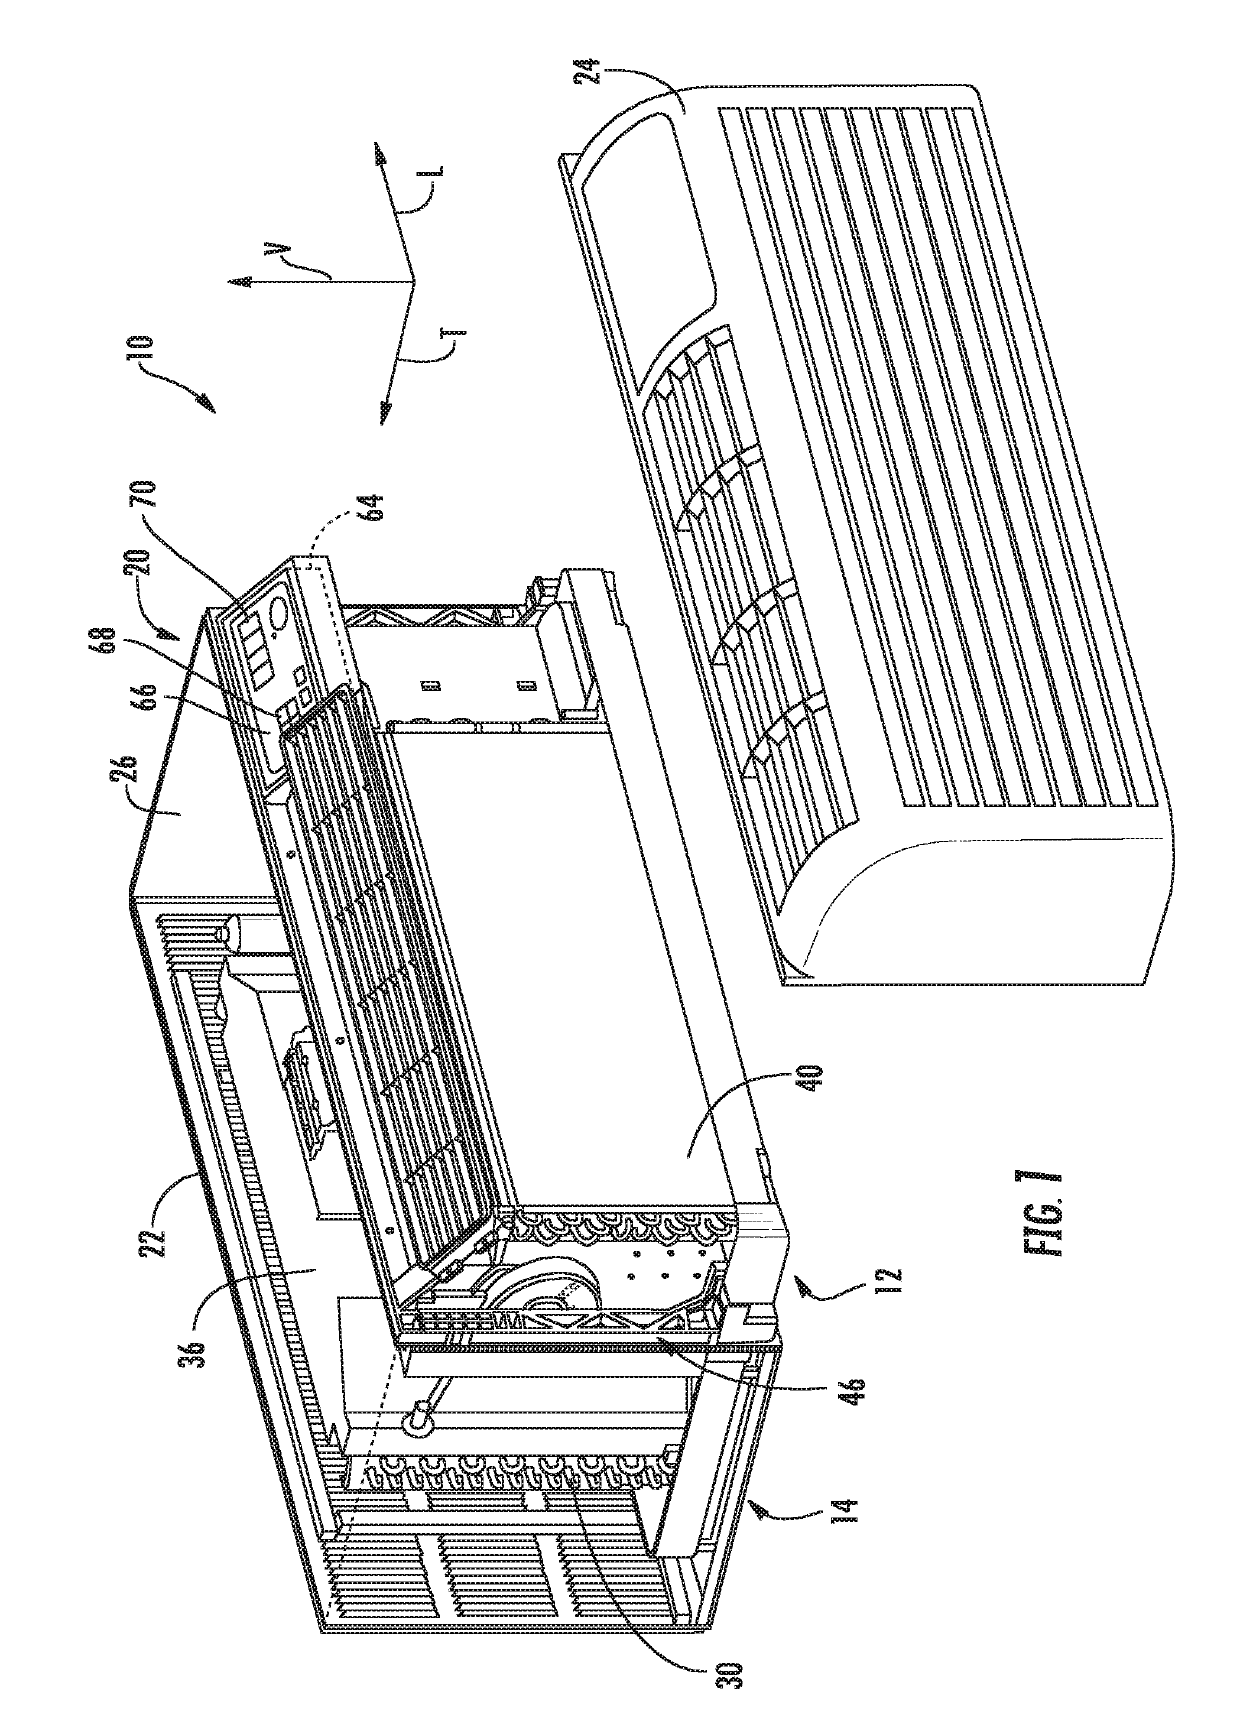 System and method for determining the position of a vent door of a packaged terminal air conditioner unit